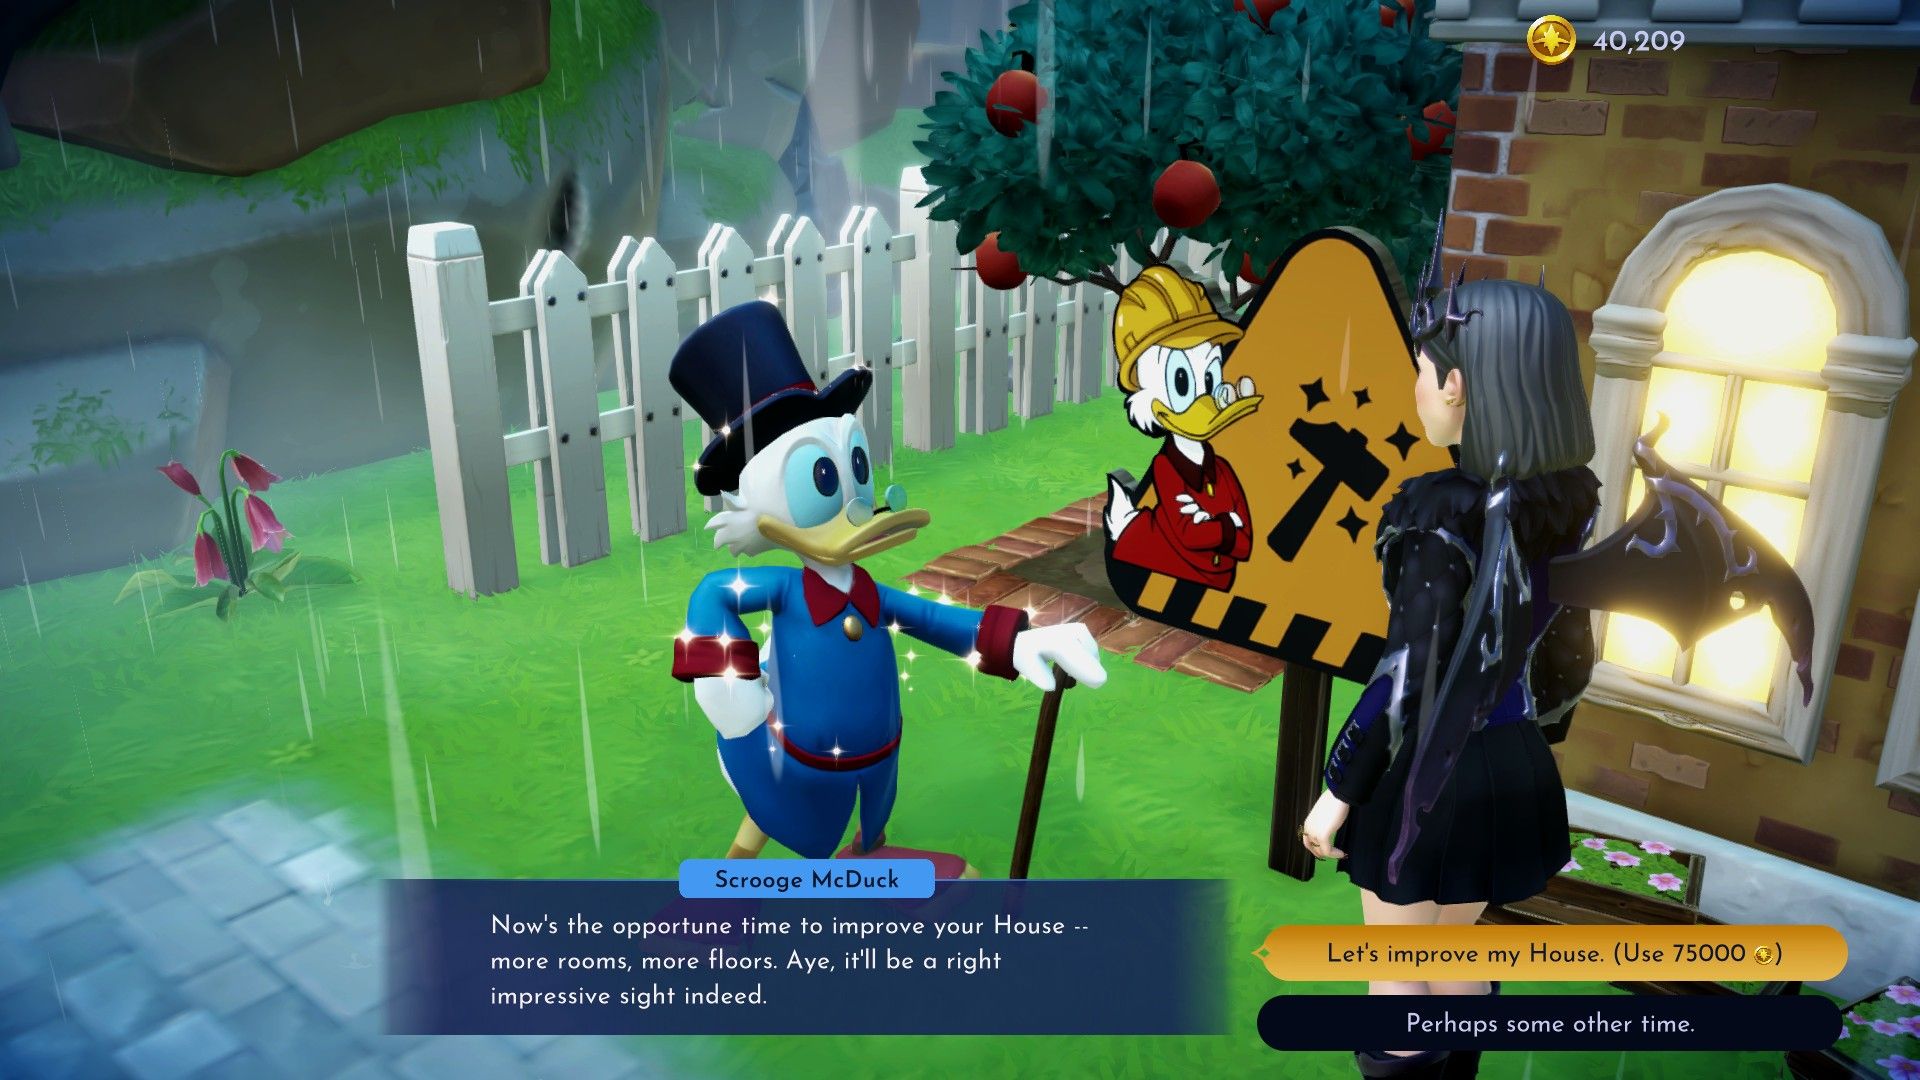 Scrooge helping the founder improve their home in dreamlight Valley